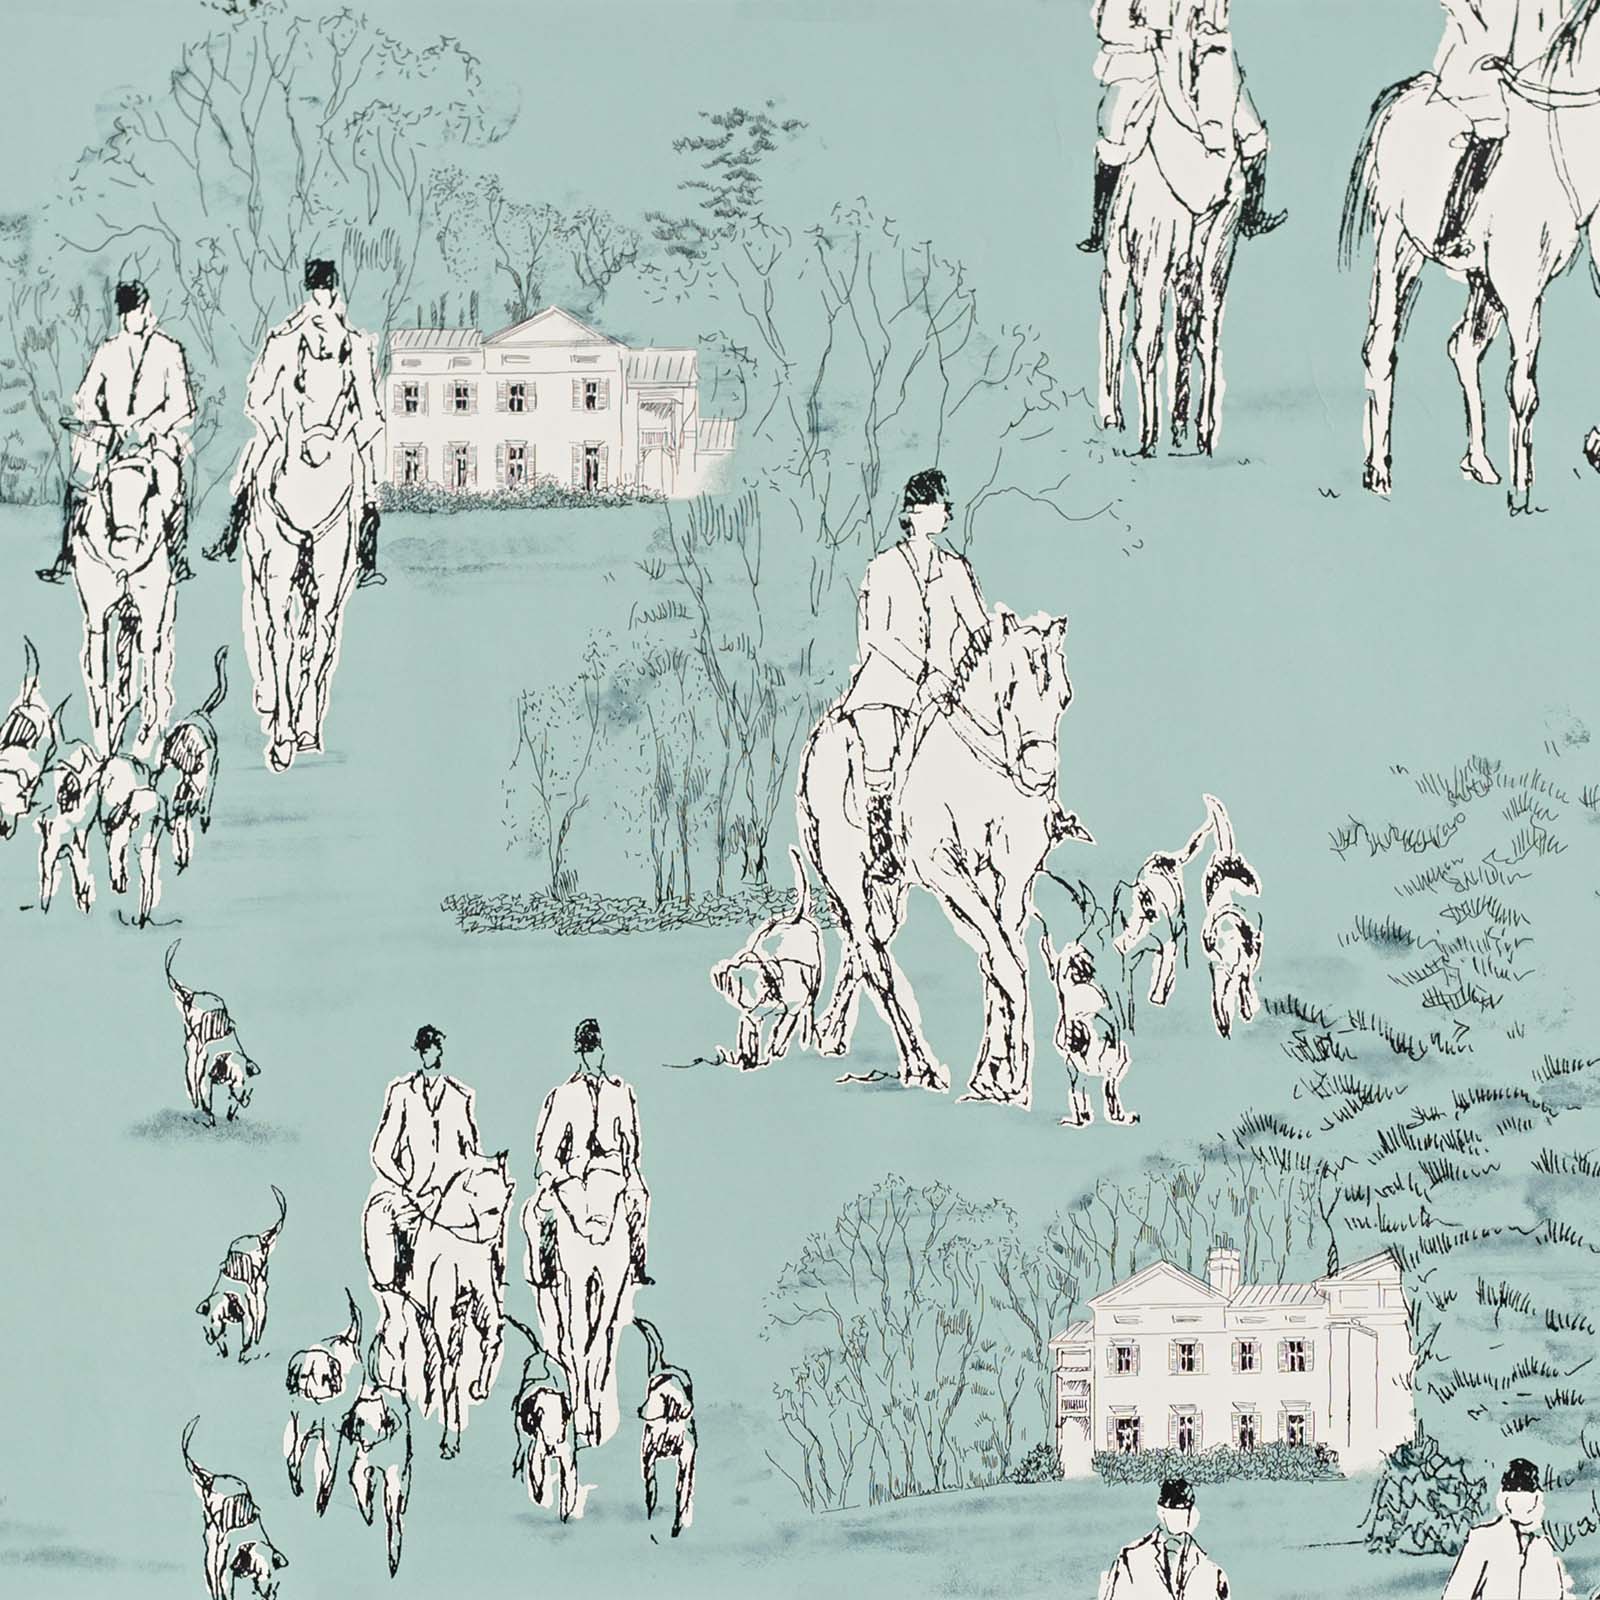 Horse hunt Wallpaper equestrian hounds toile blue - PRE ORDER : SHIPS OCT 20th